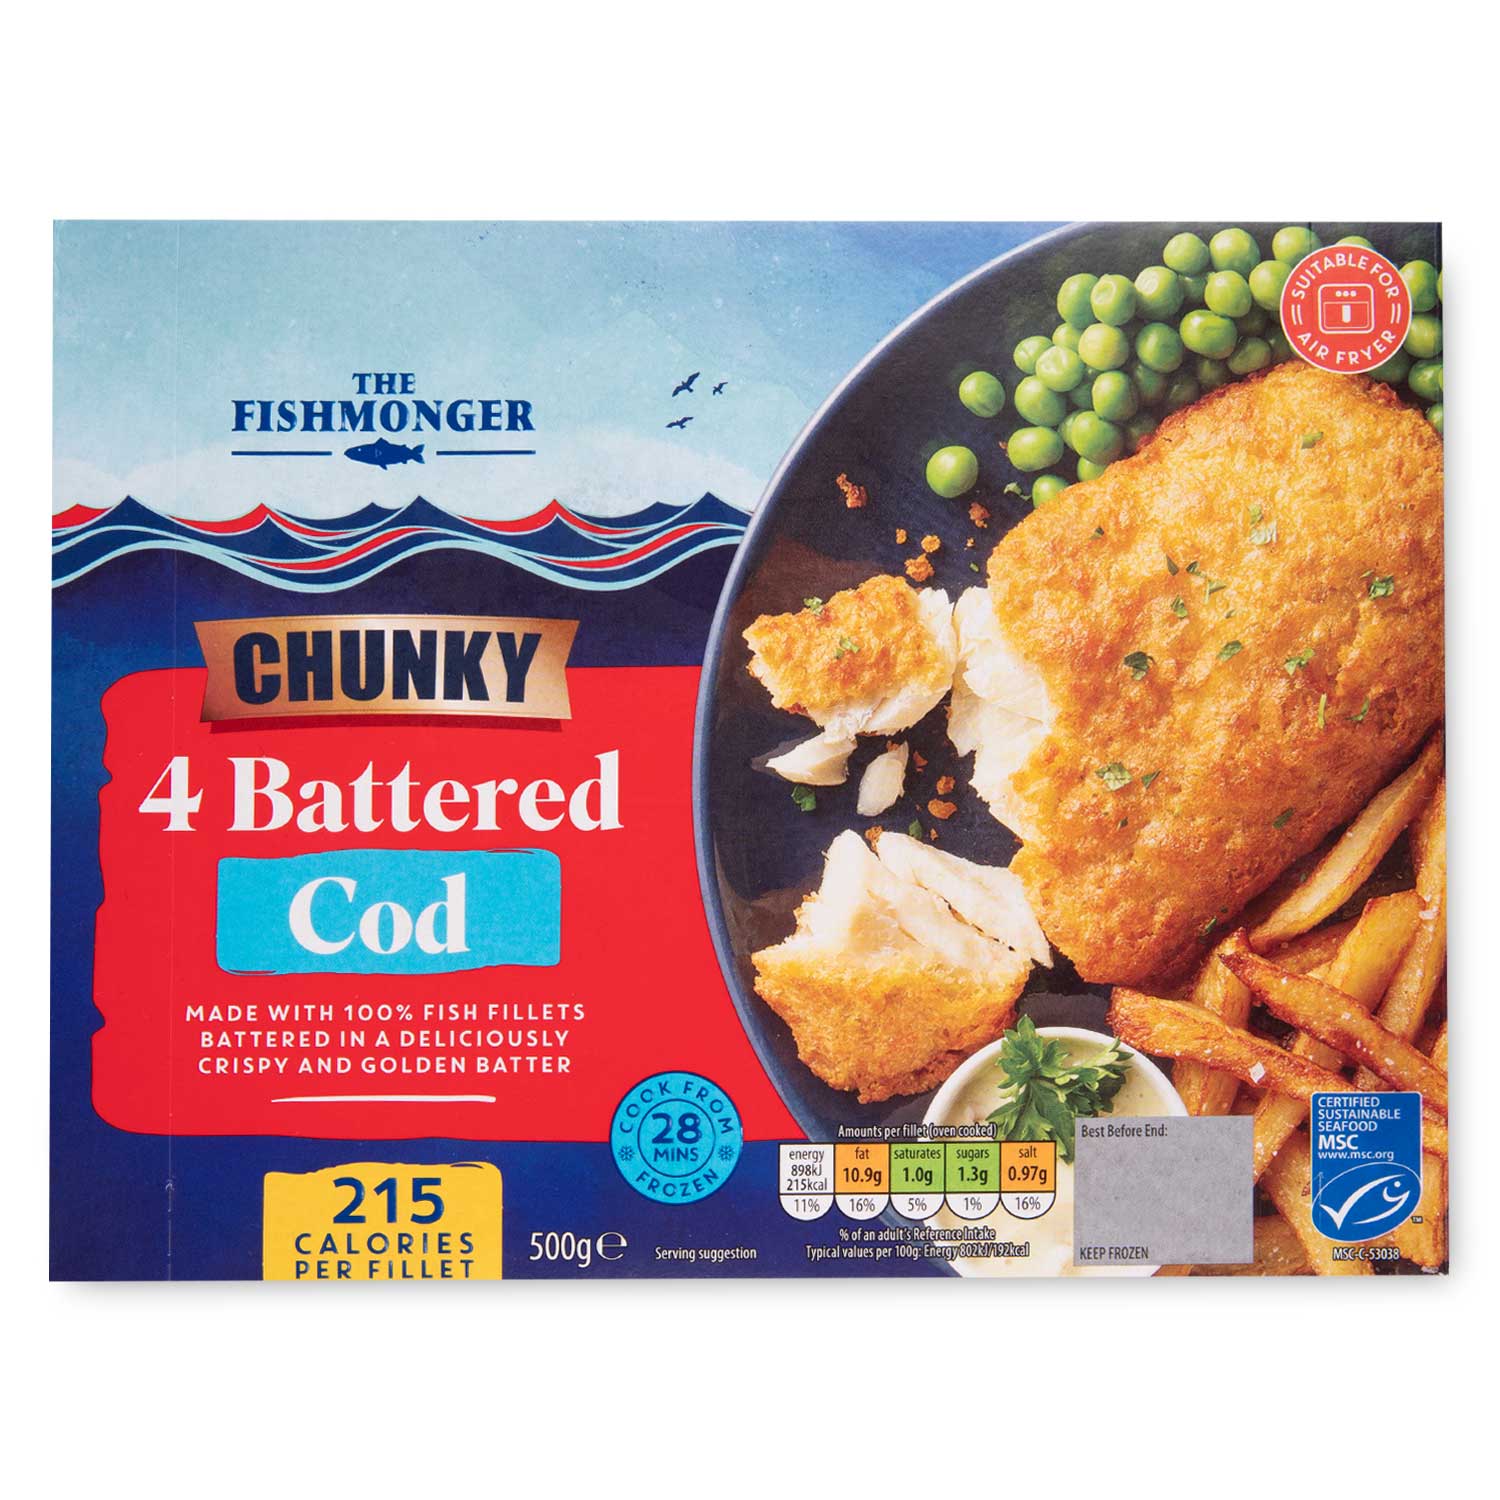 The Fishmonger Chunky Battered Cod Fish Fillets 500g/4 Pack